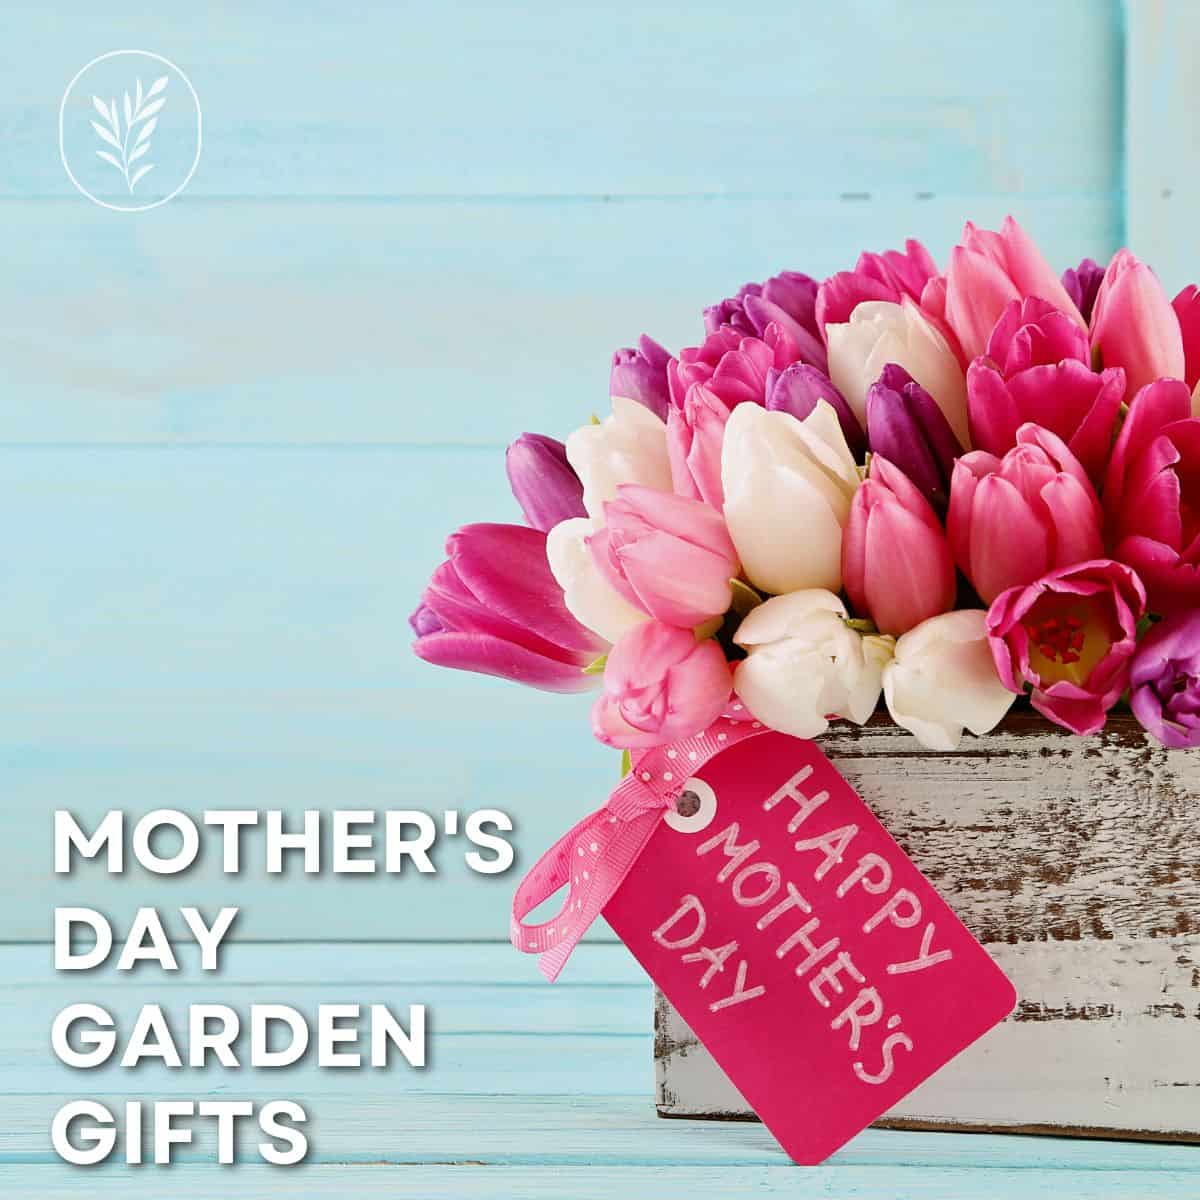 Mother's day garden gifts via @home4theharvest